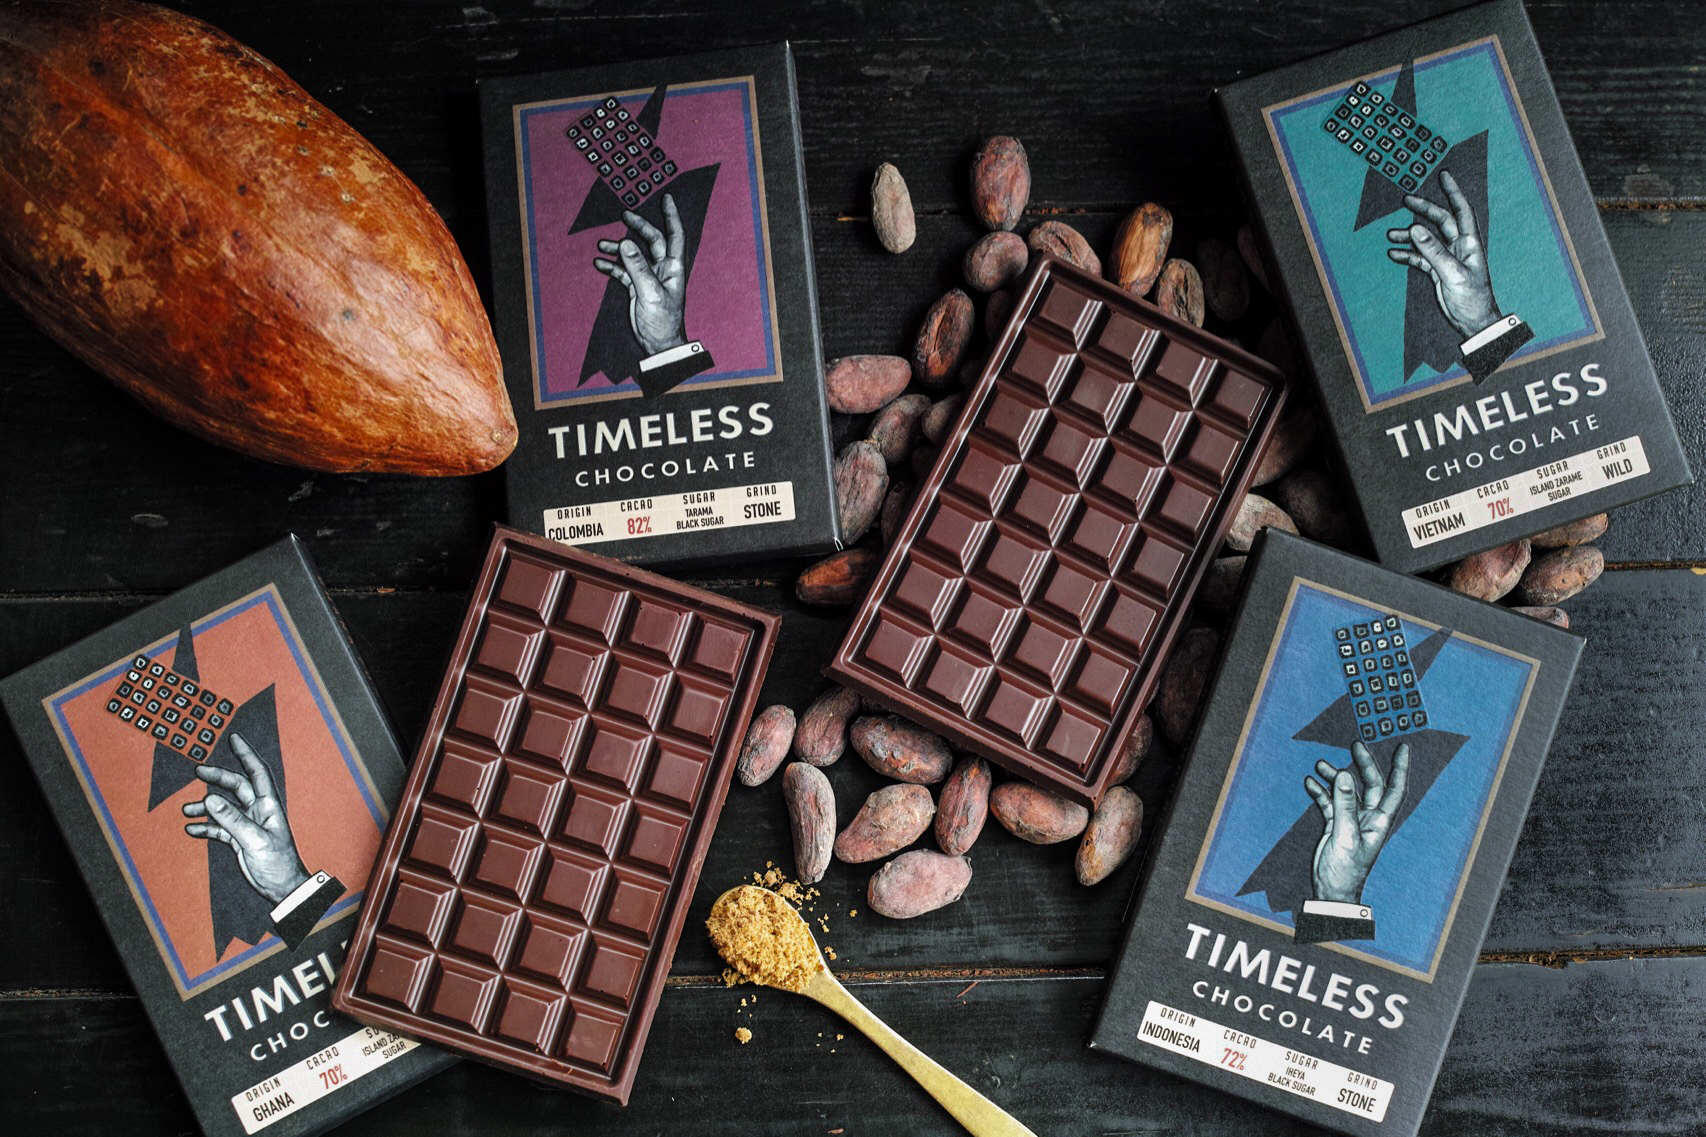 TIMELESS CHOCOLATE ONLINESHOP ブログについて